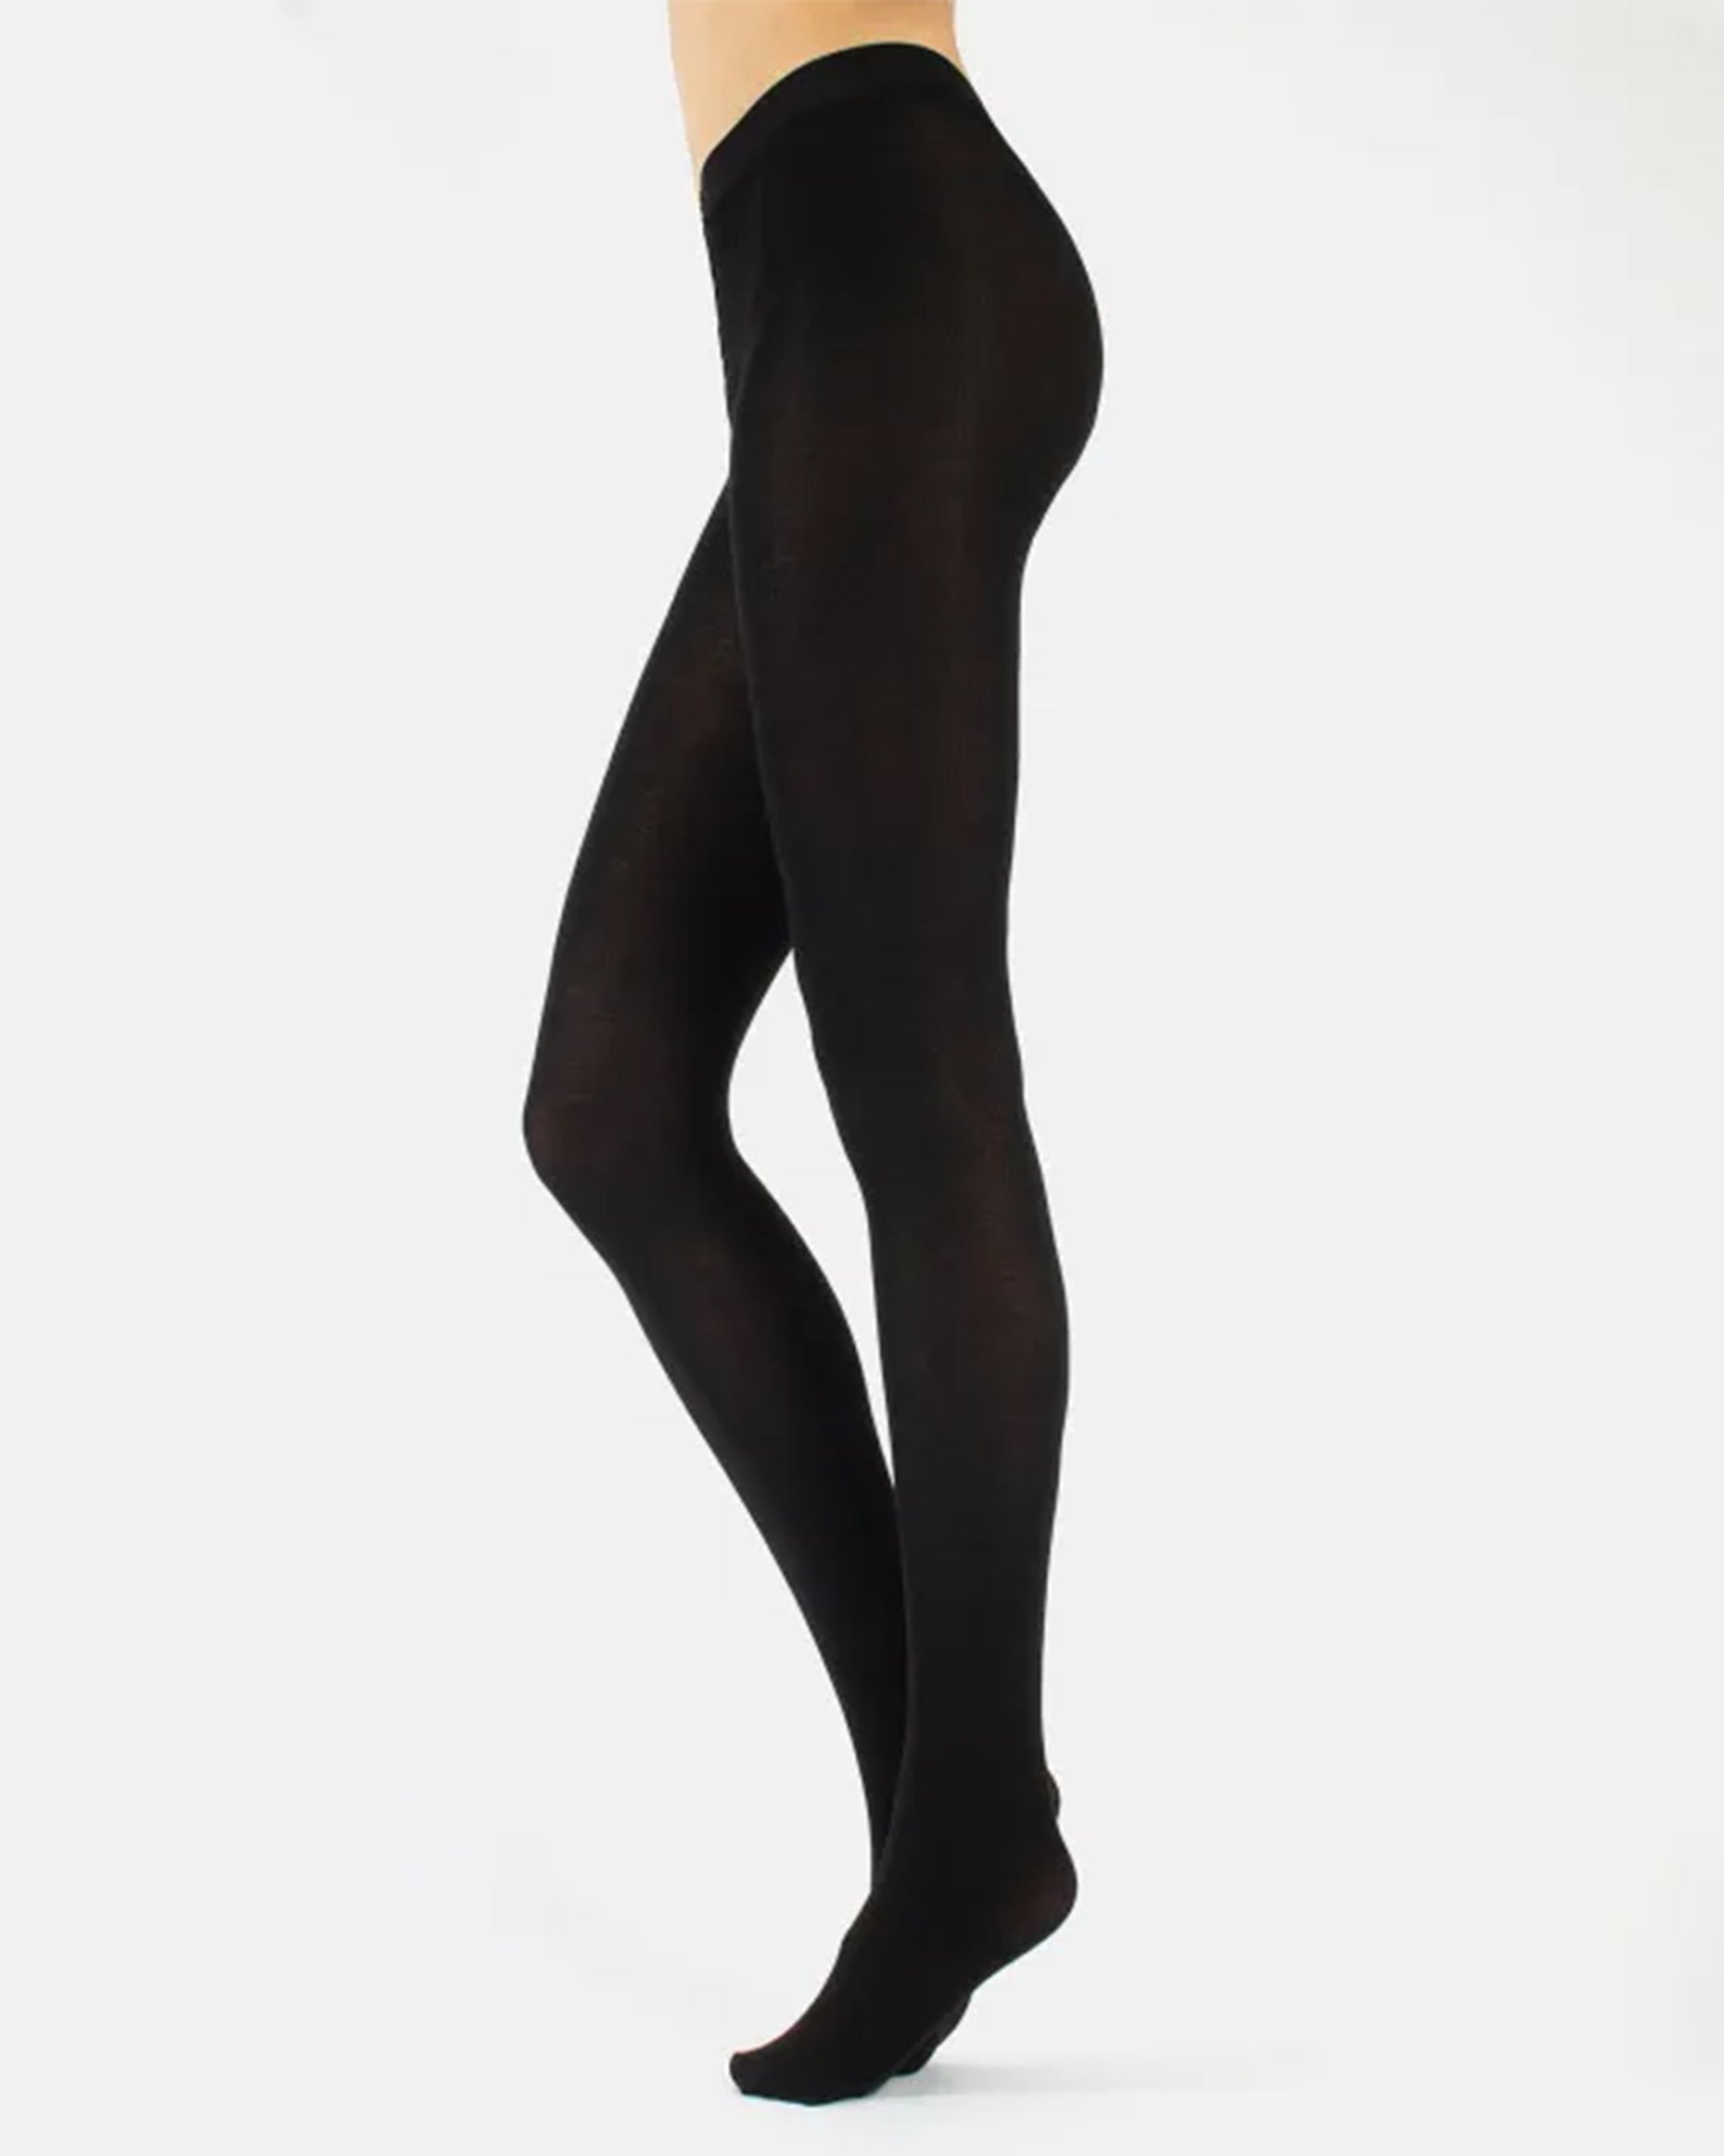 Calzitaly Cashmere Wool Tights - Black warm and light knitted viscose mix thermal tights with a touch of soft cashmere wool.